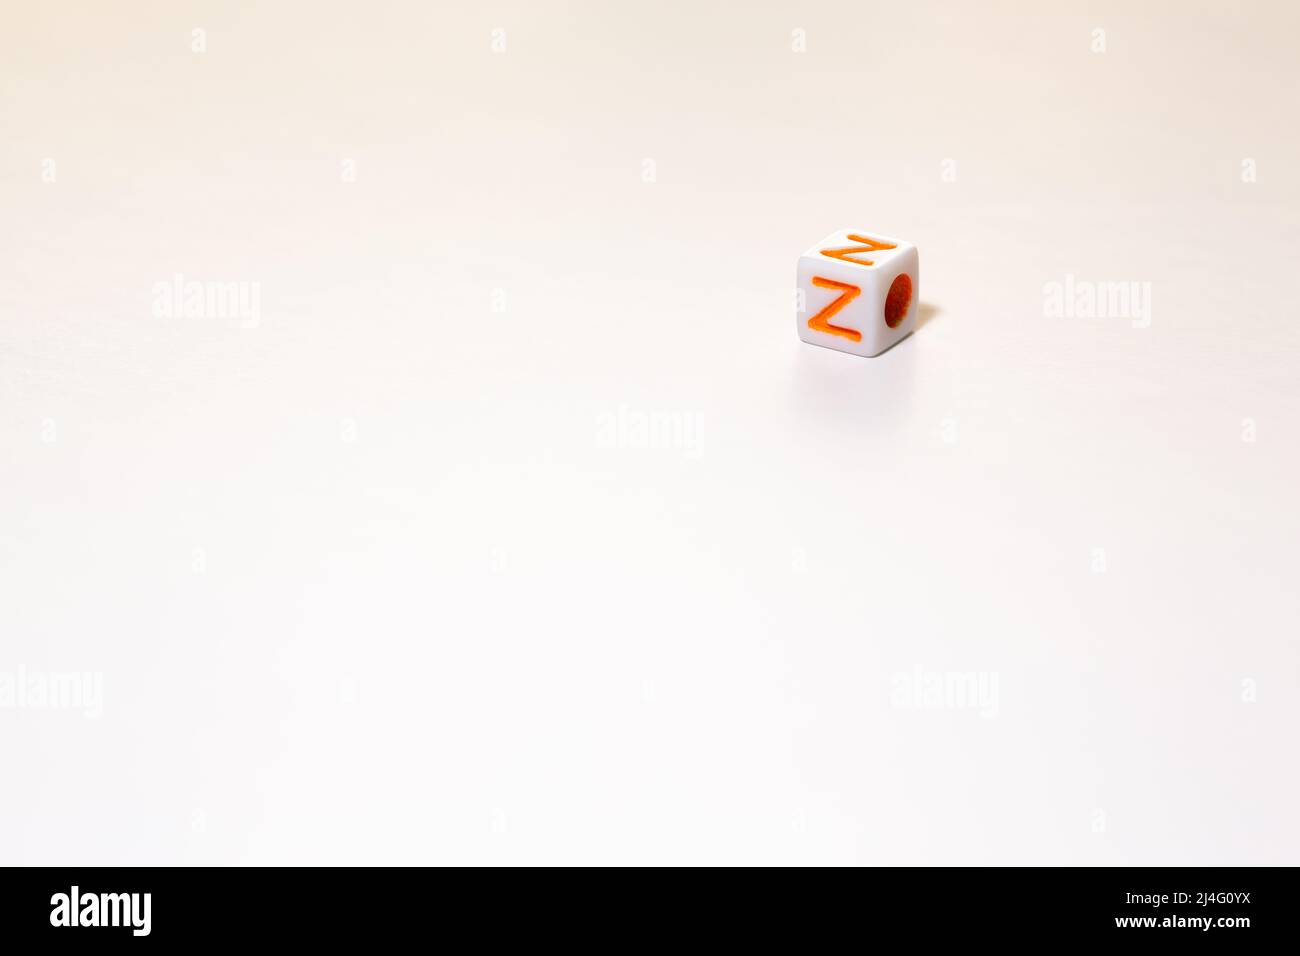 Cube shaped game dice with the orange letter Z on it on a white isolated background. Free text space at the bottom and left. Generation Z concept. Stock Photo